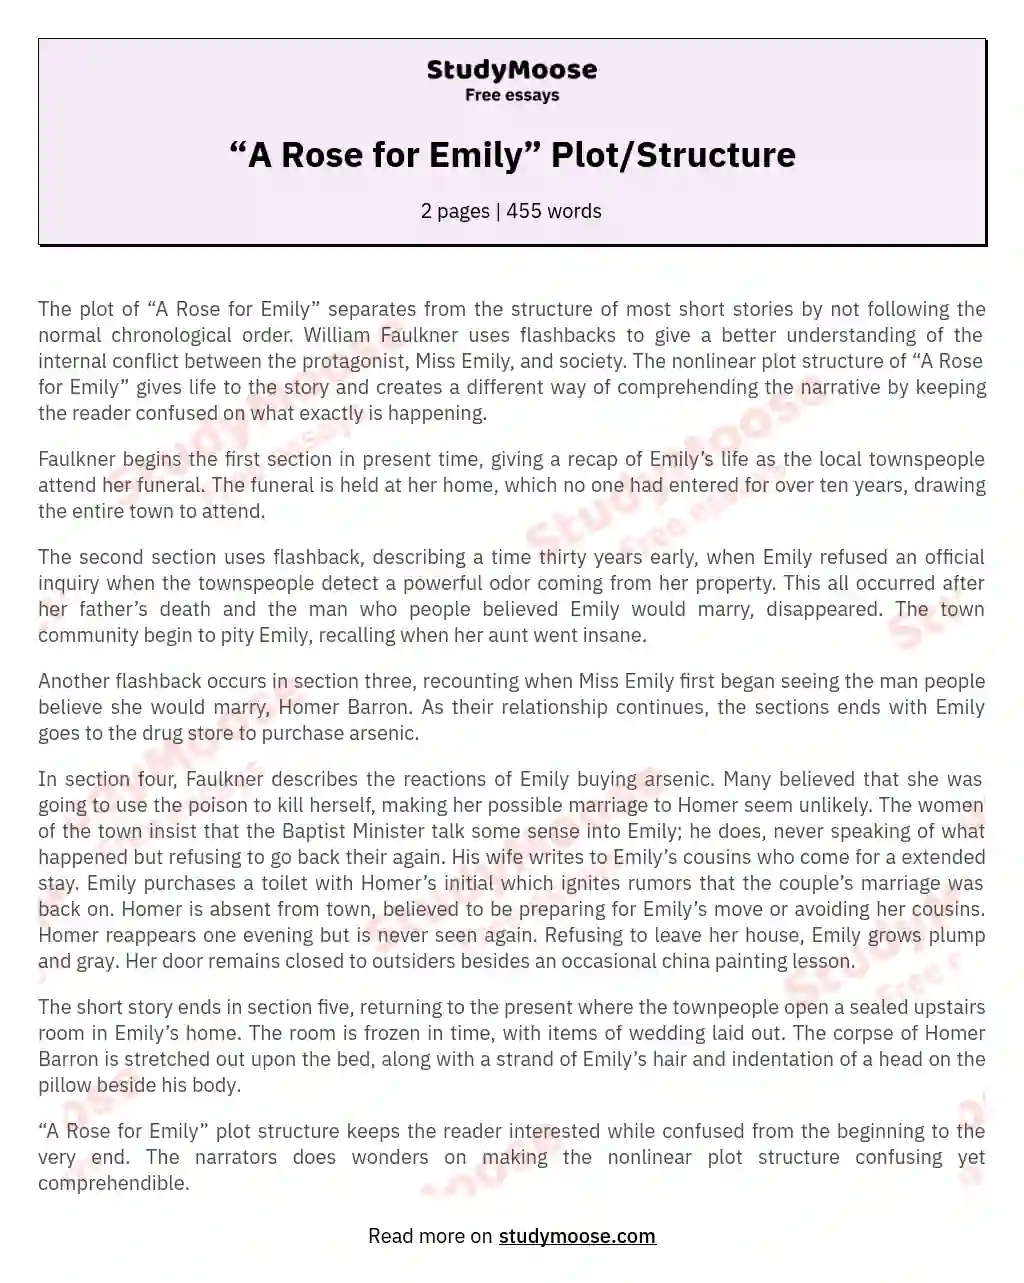 “A Rose for Emily” Plot/Structure essay